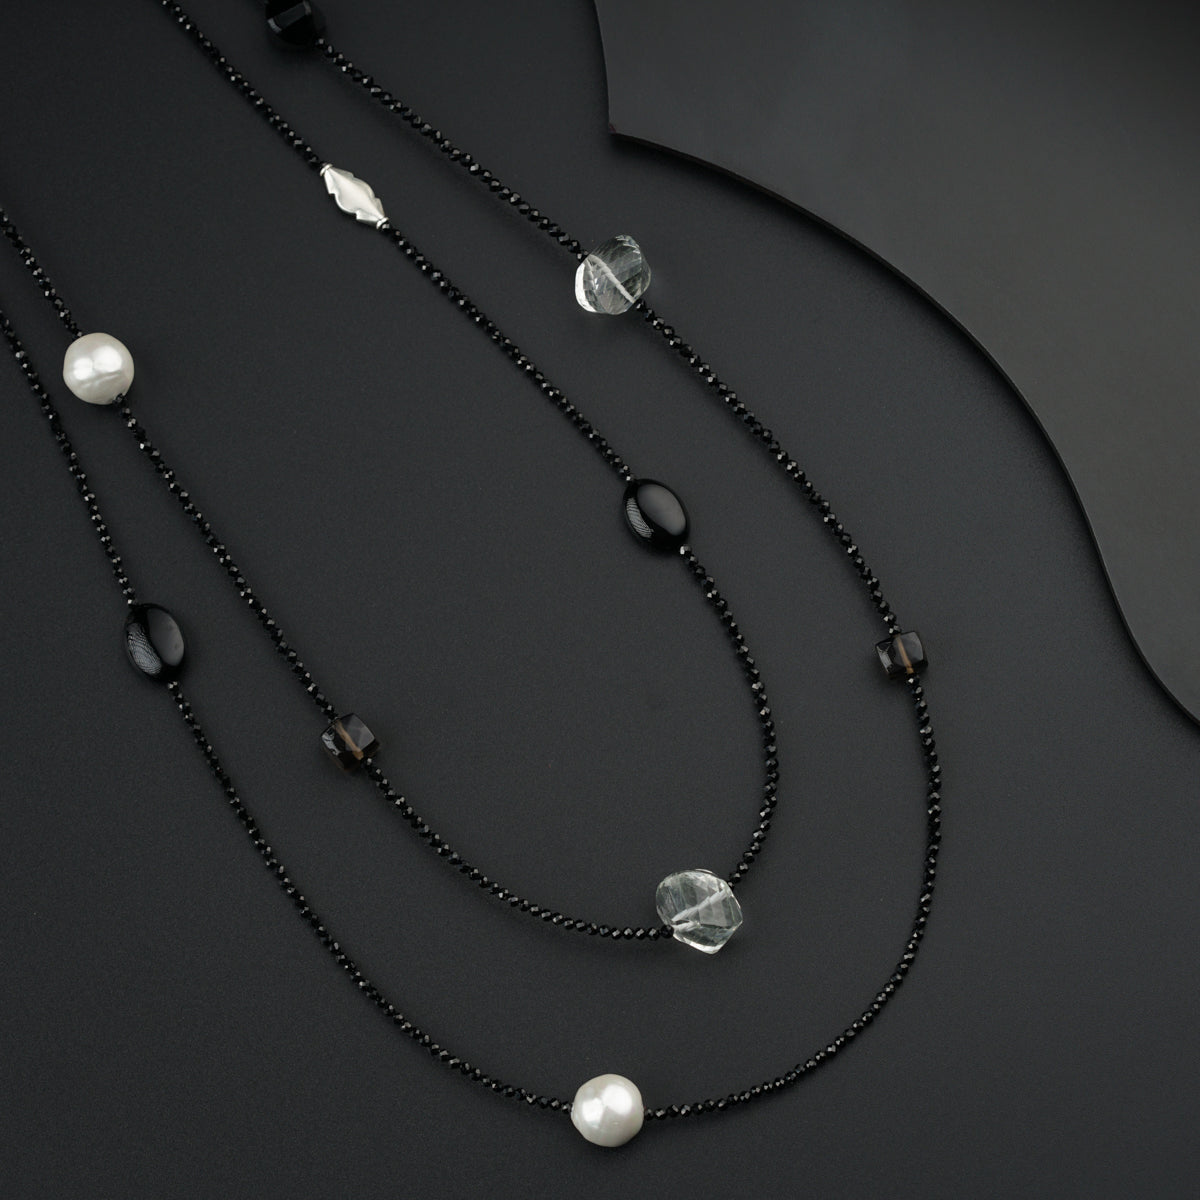 Galaxy Silver Necklace with Pearls, Smokey Quartz, Black Spinels and silver findings